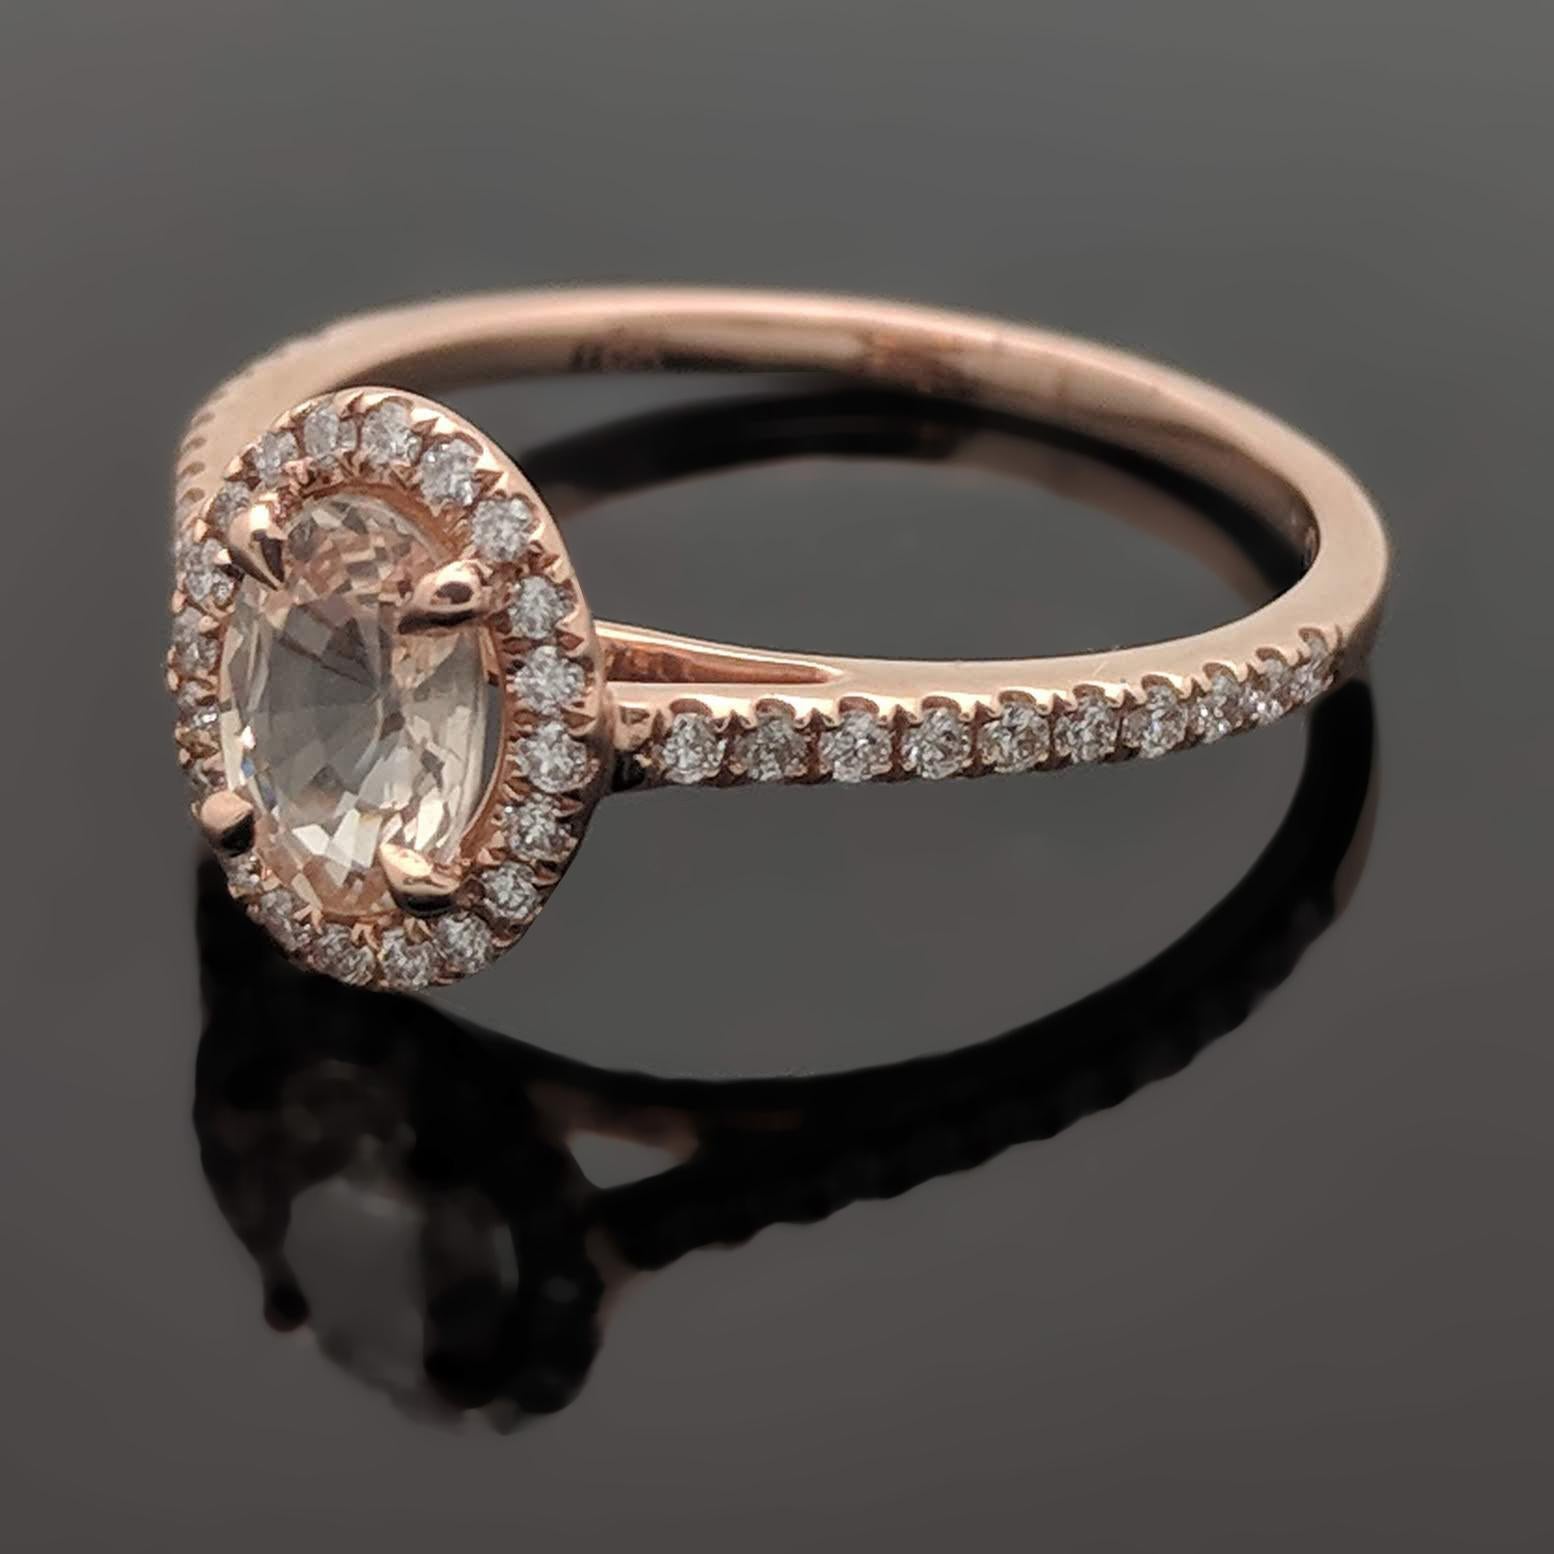 This 14kt rose gold ring features a pink sapphire estimated at 0.50ct in a 4 prong setting. The sapphire is surrounded by a diamond halo as well as diamonds down the shank with an estimated 0.14cttw. Estimated weight of gold is 1 gr. 

We will size